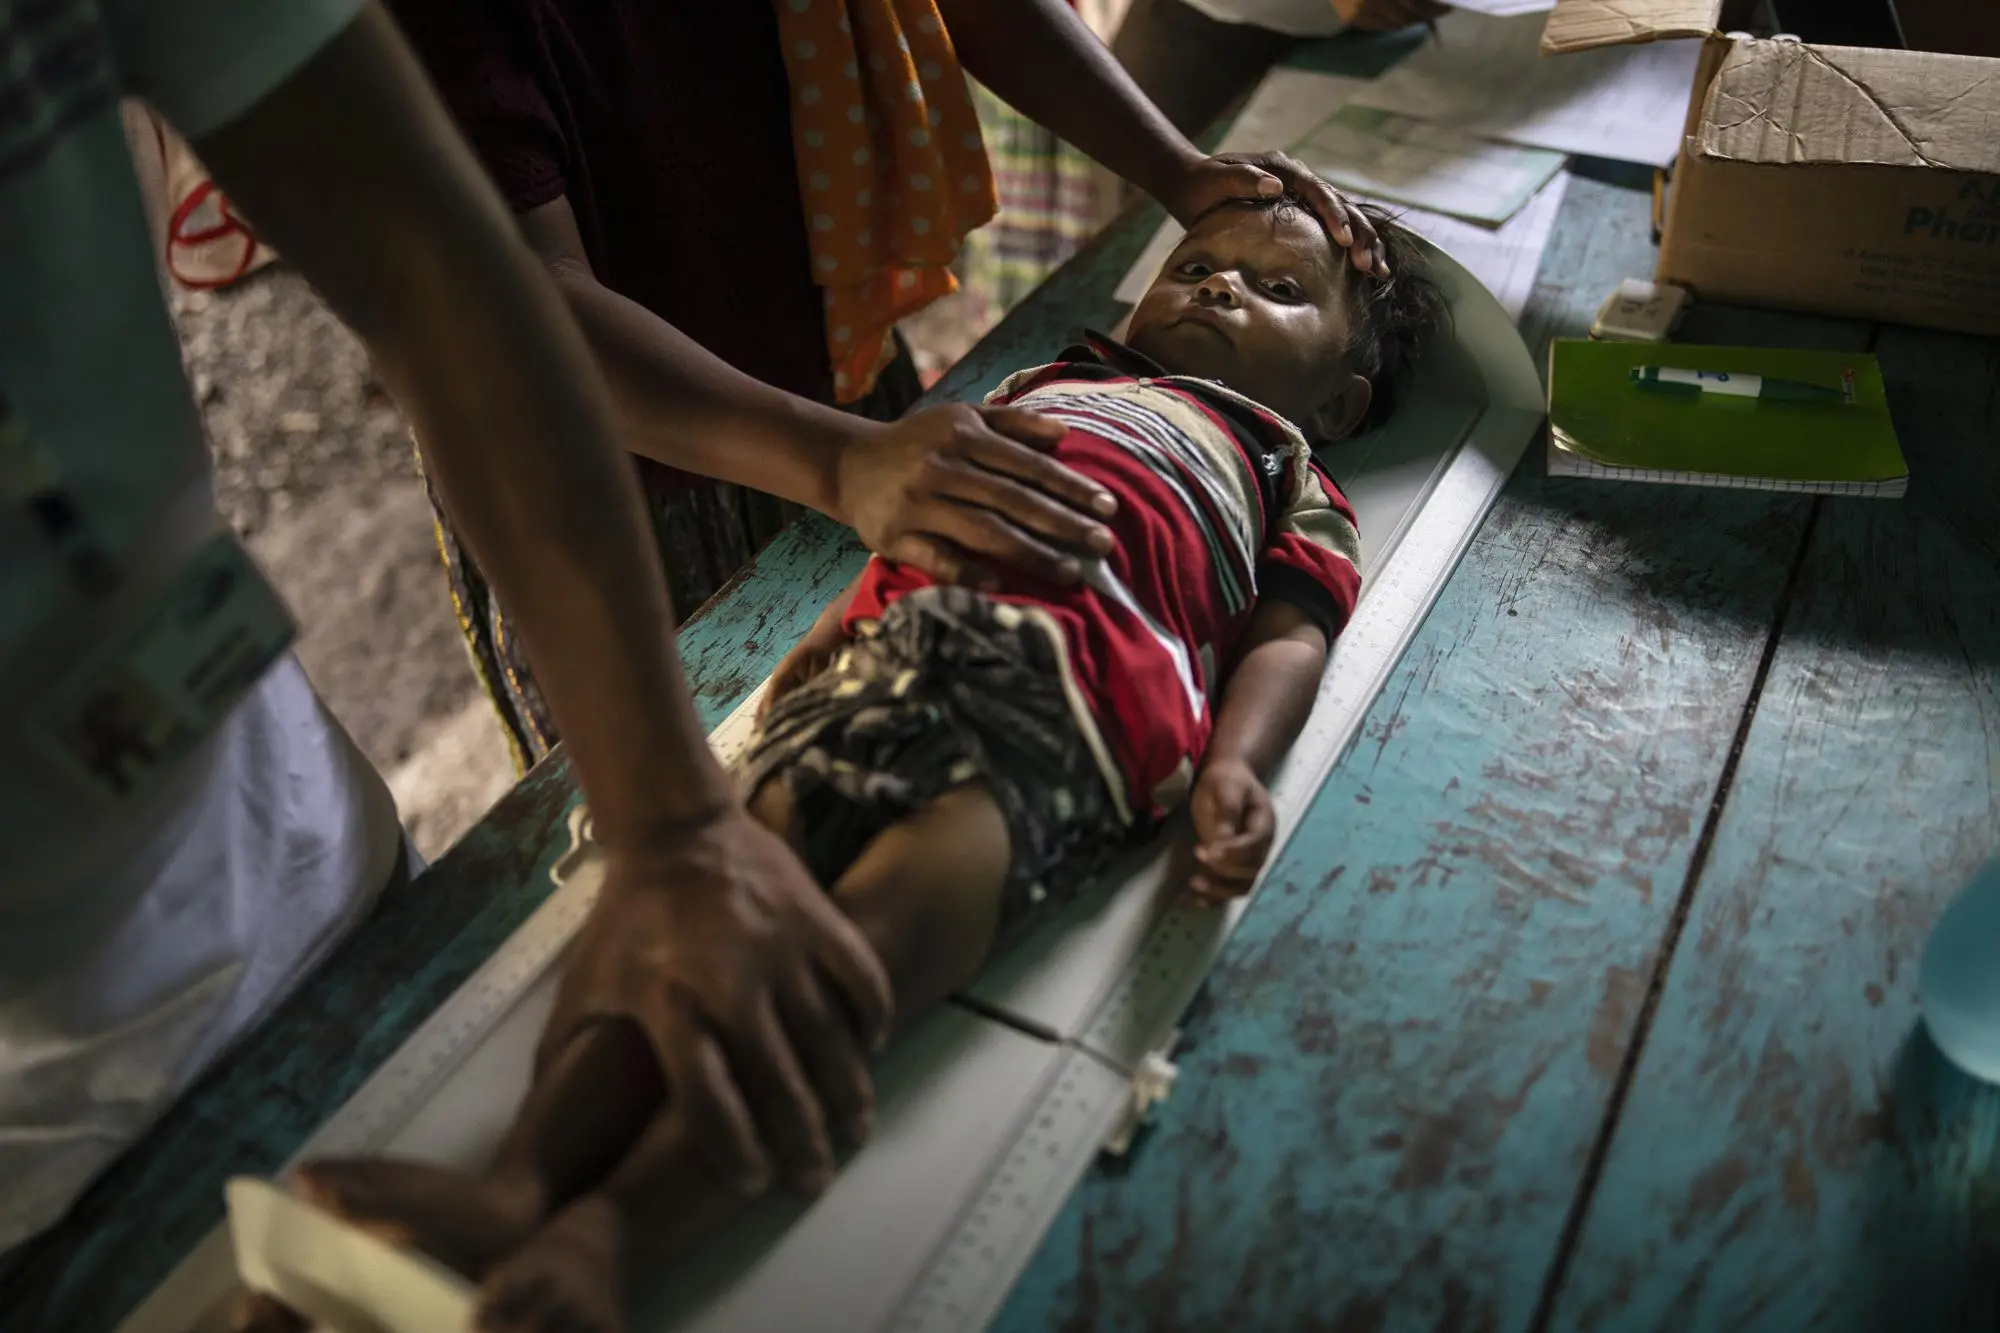 A child goes for a wellness check-up and is laying on a bed